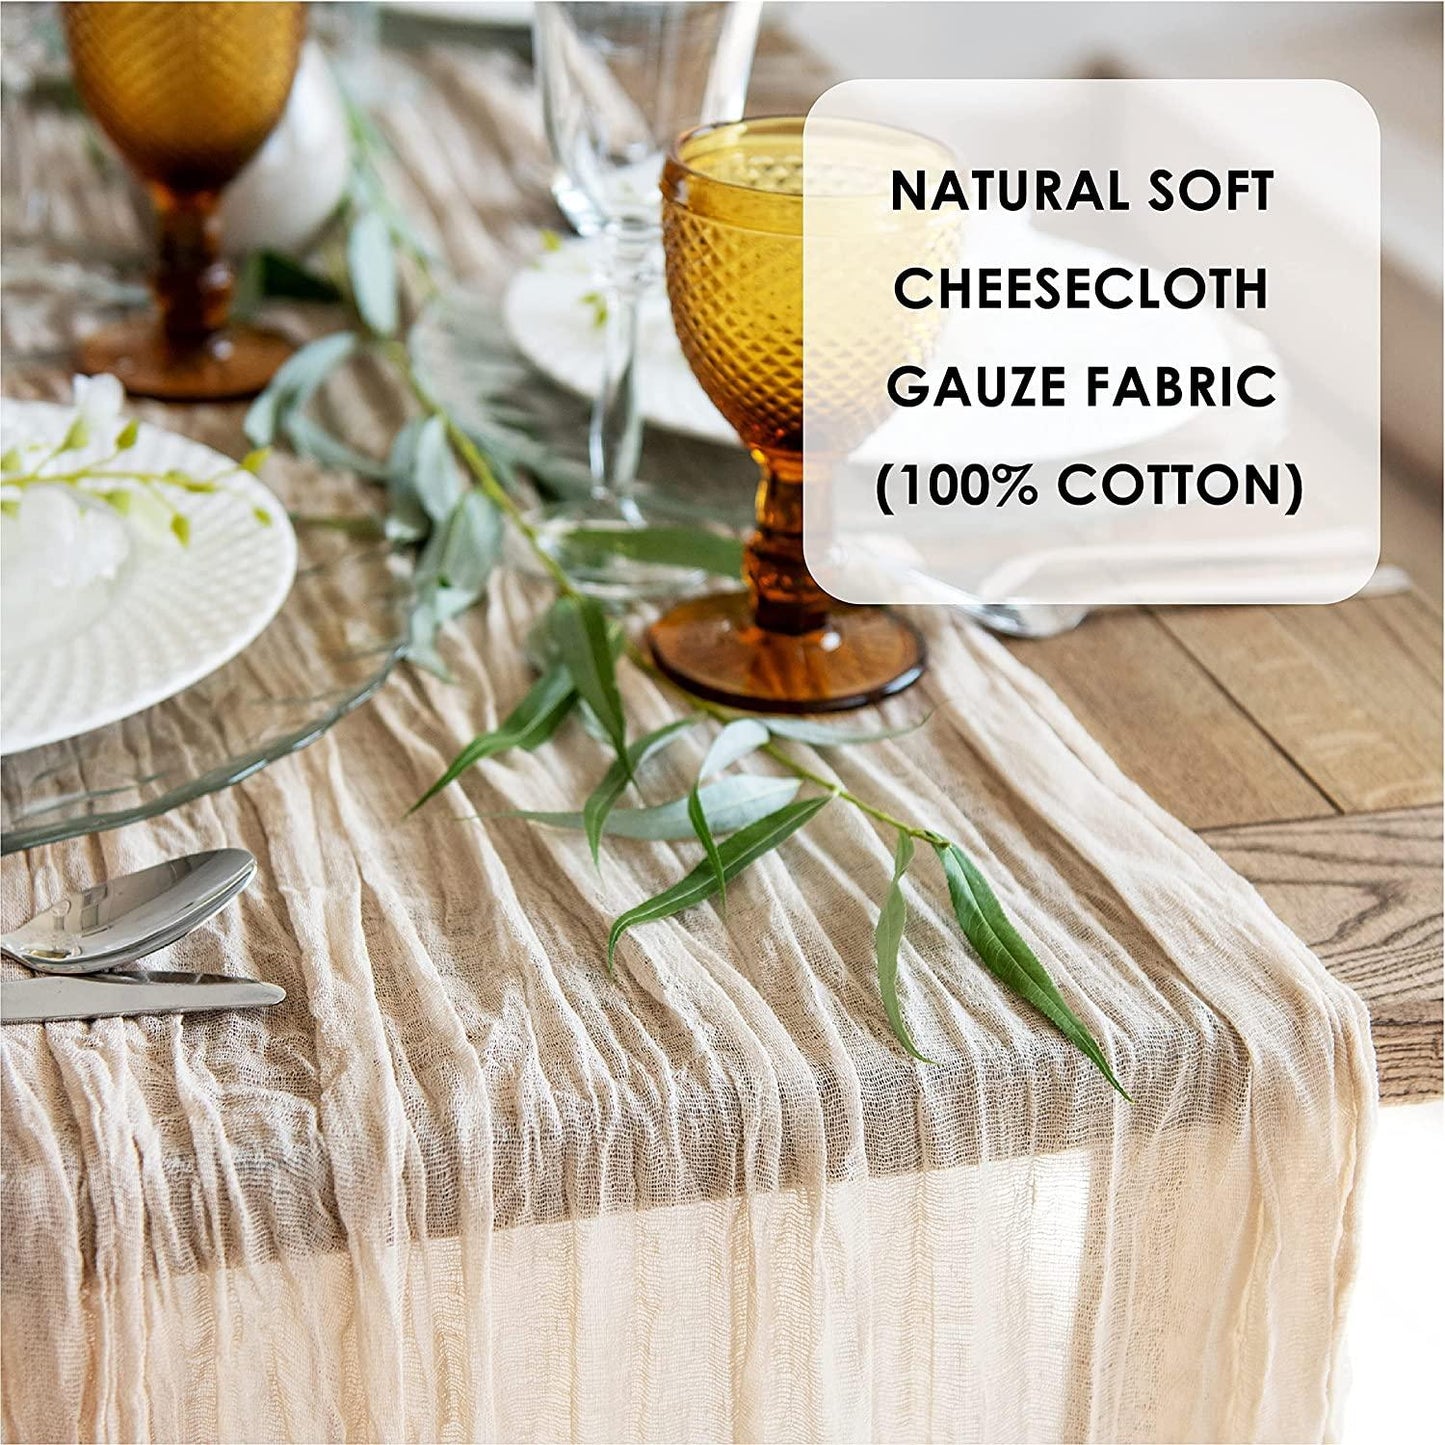 Gauze Table Runner Holiday Table Runner For Wedding Rustic Table Runner 160In Boho Chick Rustic Wedding Table Cloth Decor - If you say i do